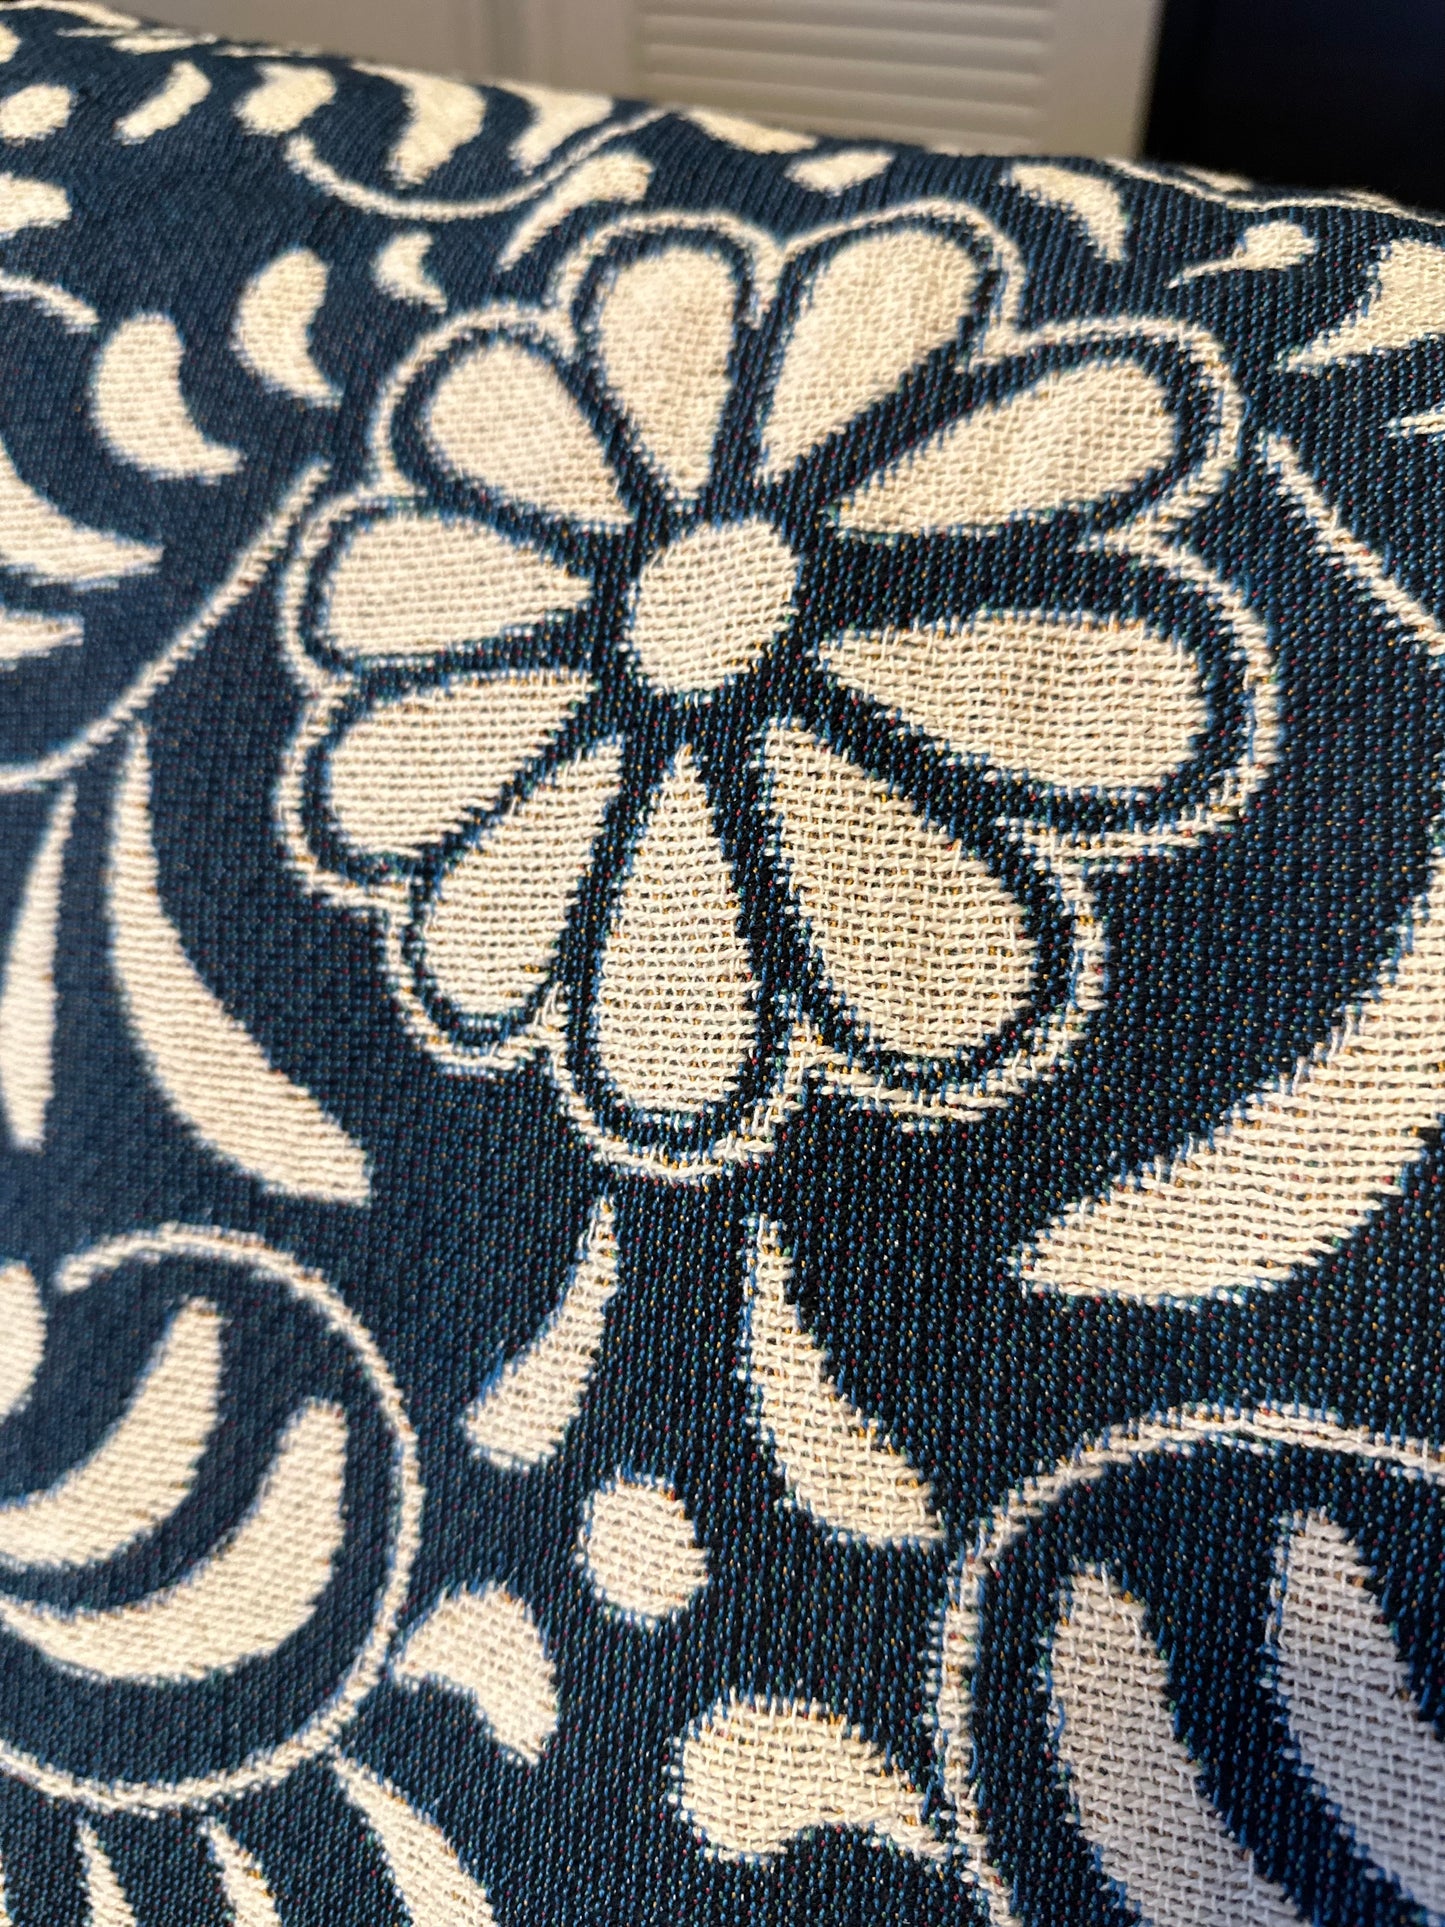 Blue Mexican floral woven blanket 50x60” clearance